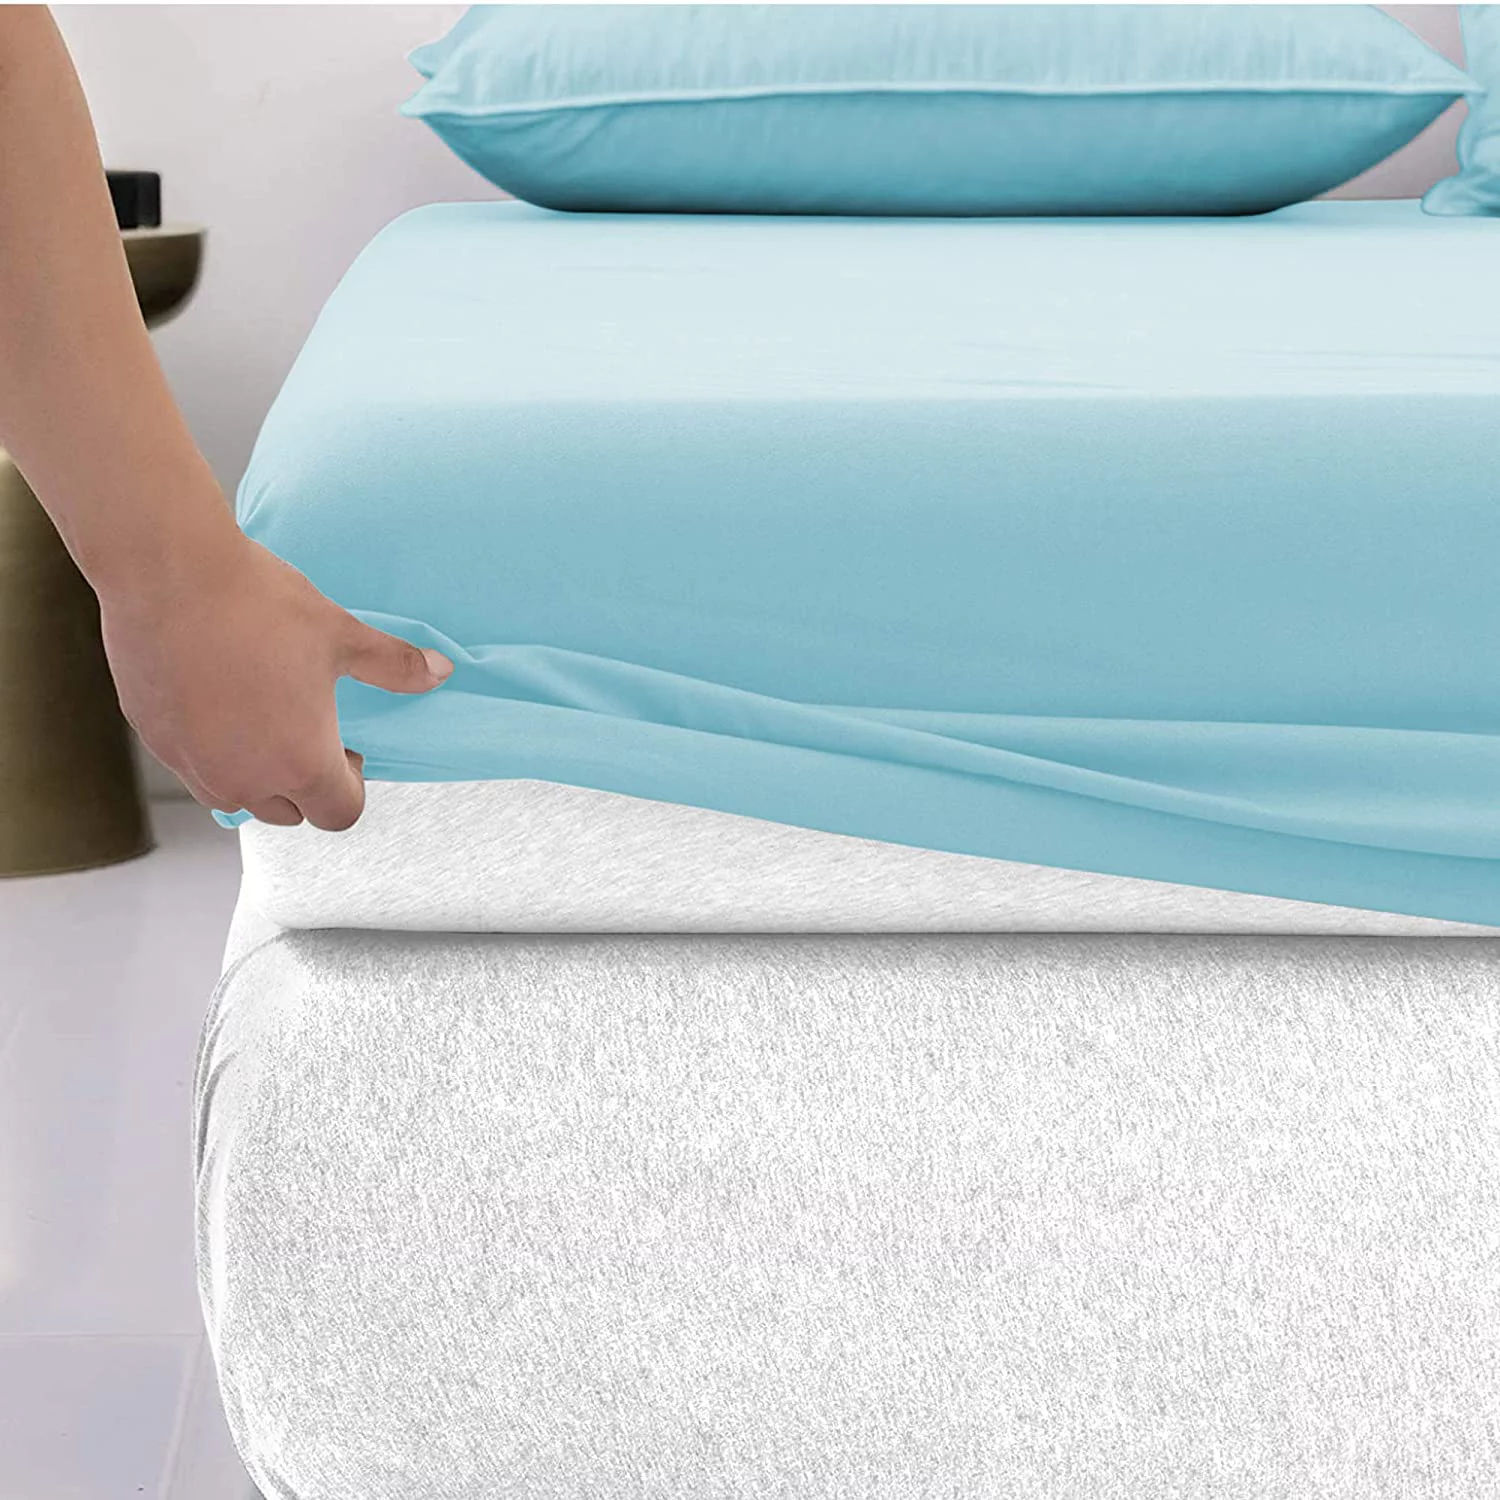 MR&HM Satin Fitted Sheet Queen Size, Silky Bottom Sheet with Elastic Corner  Straps, Deep Pocket up to 15 Inch, No More Slipping Off for Mattress - 1